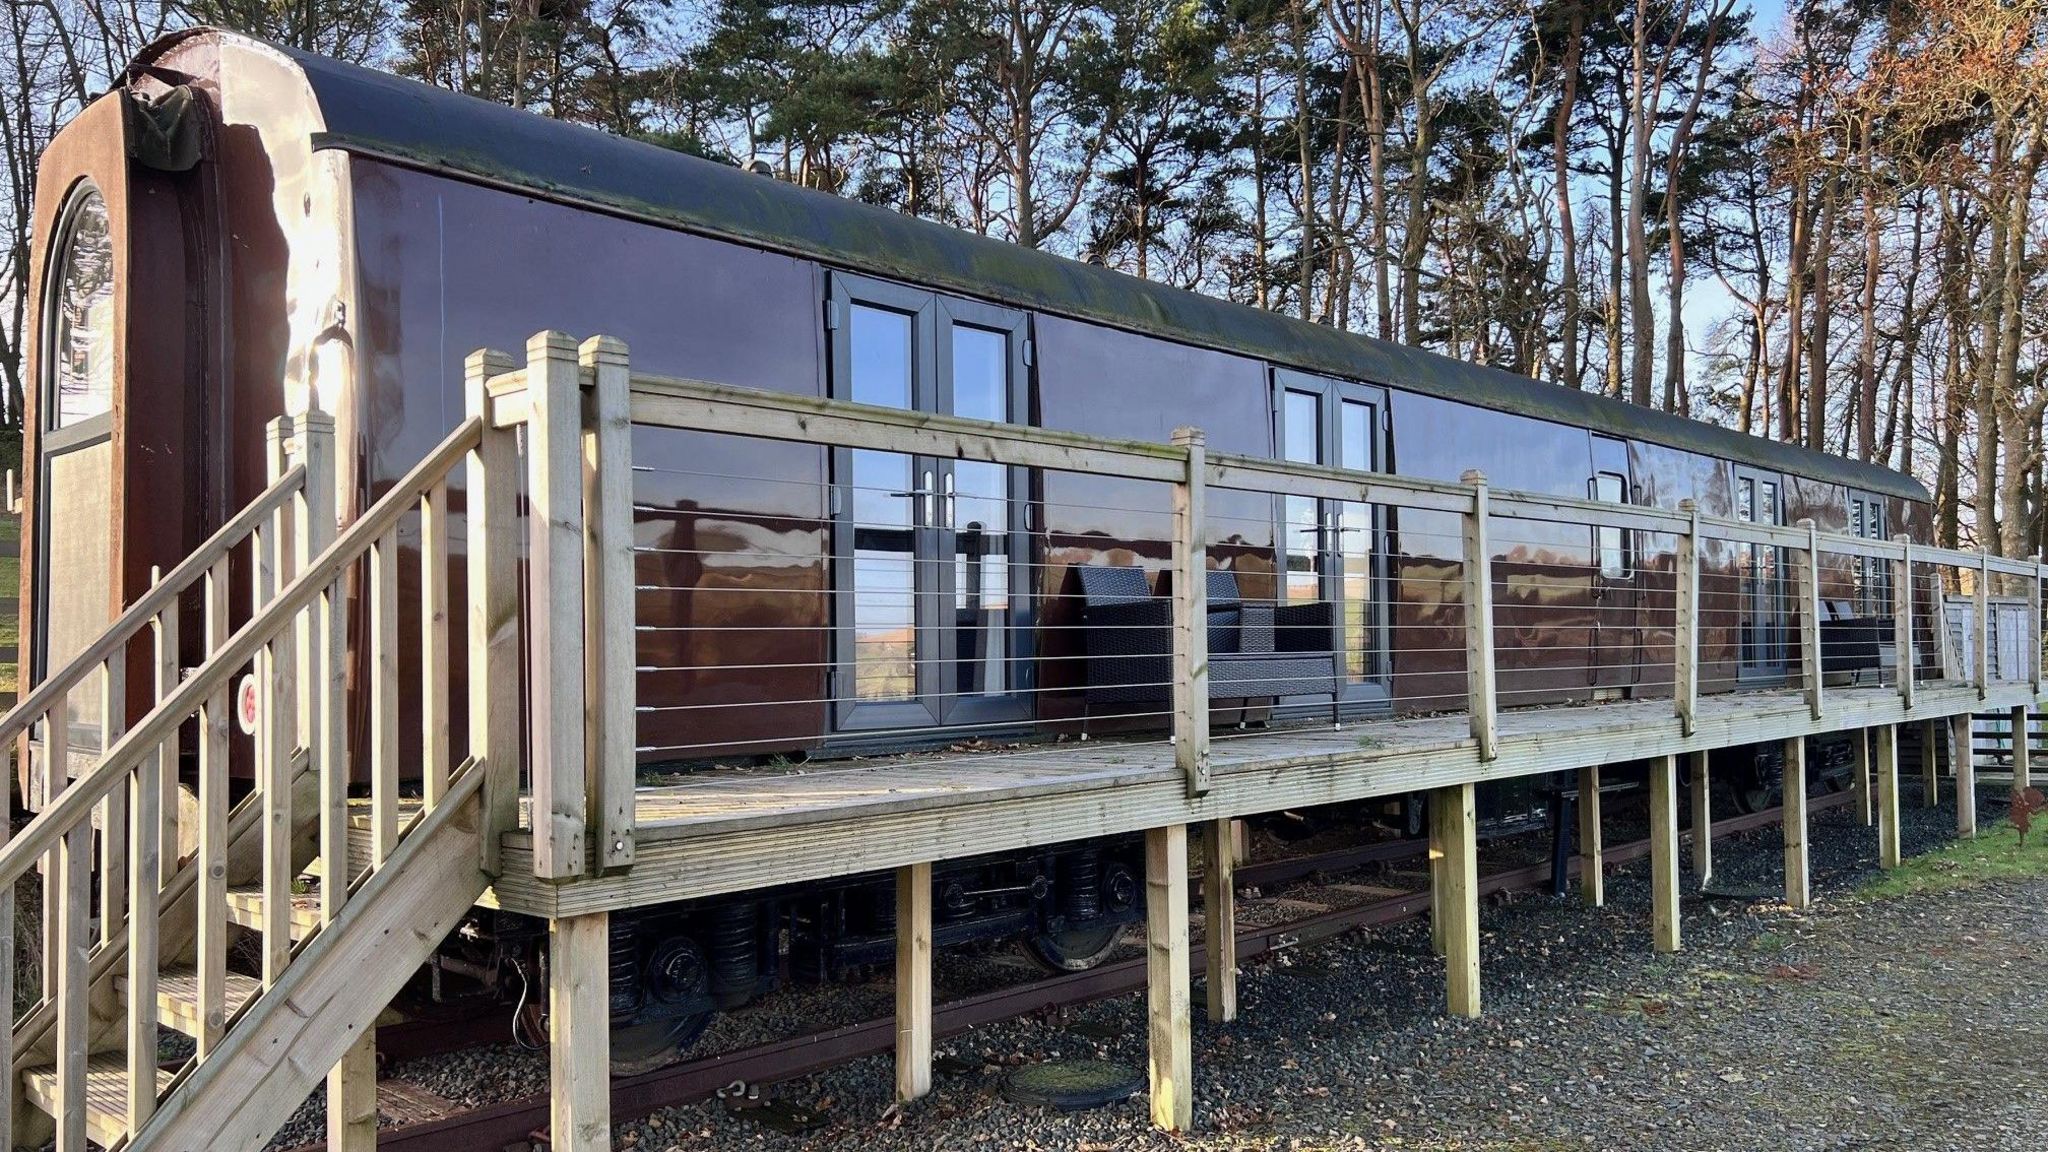 Converted train carriage